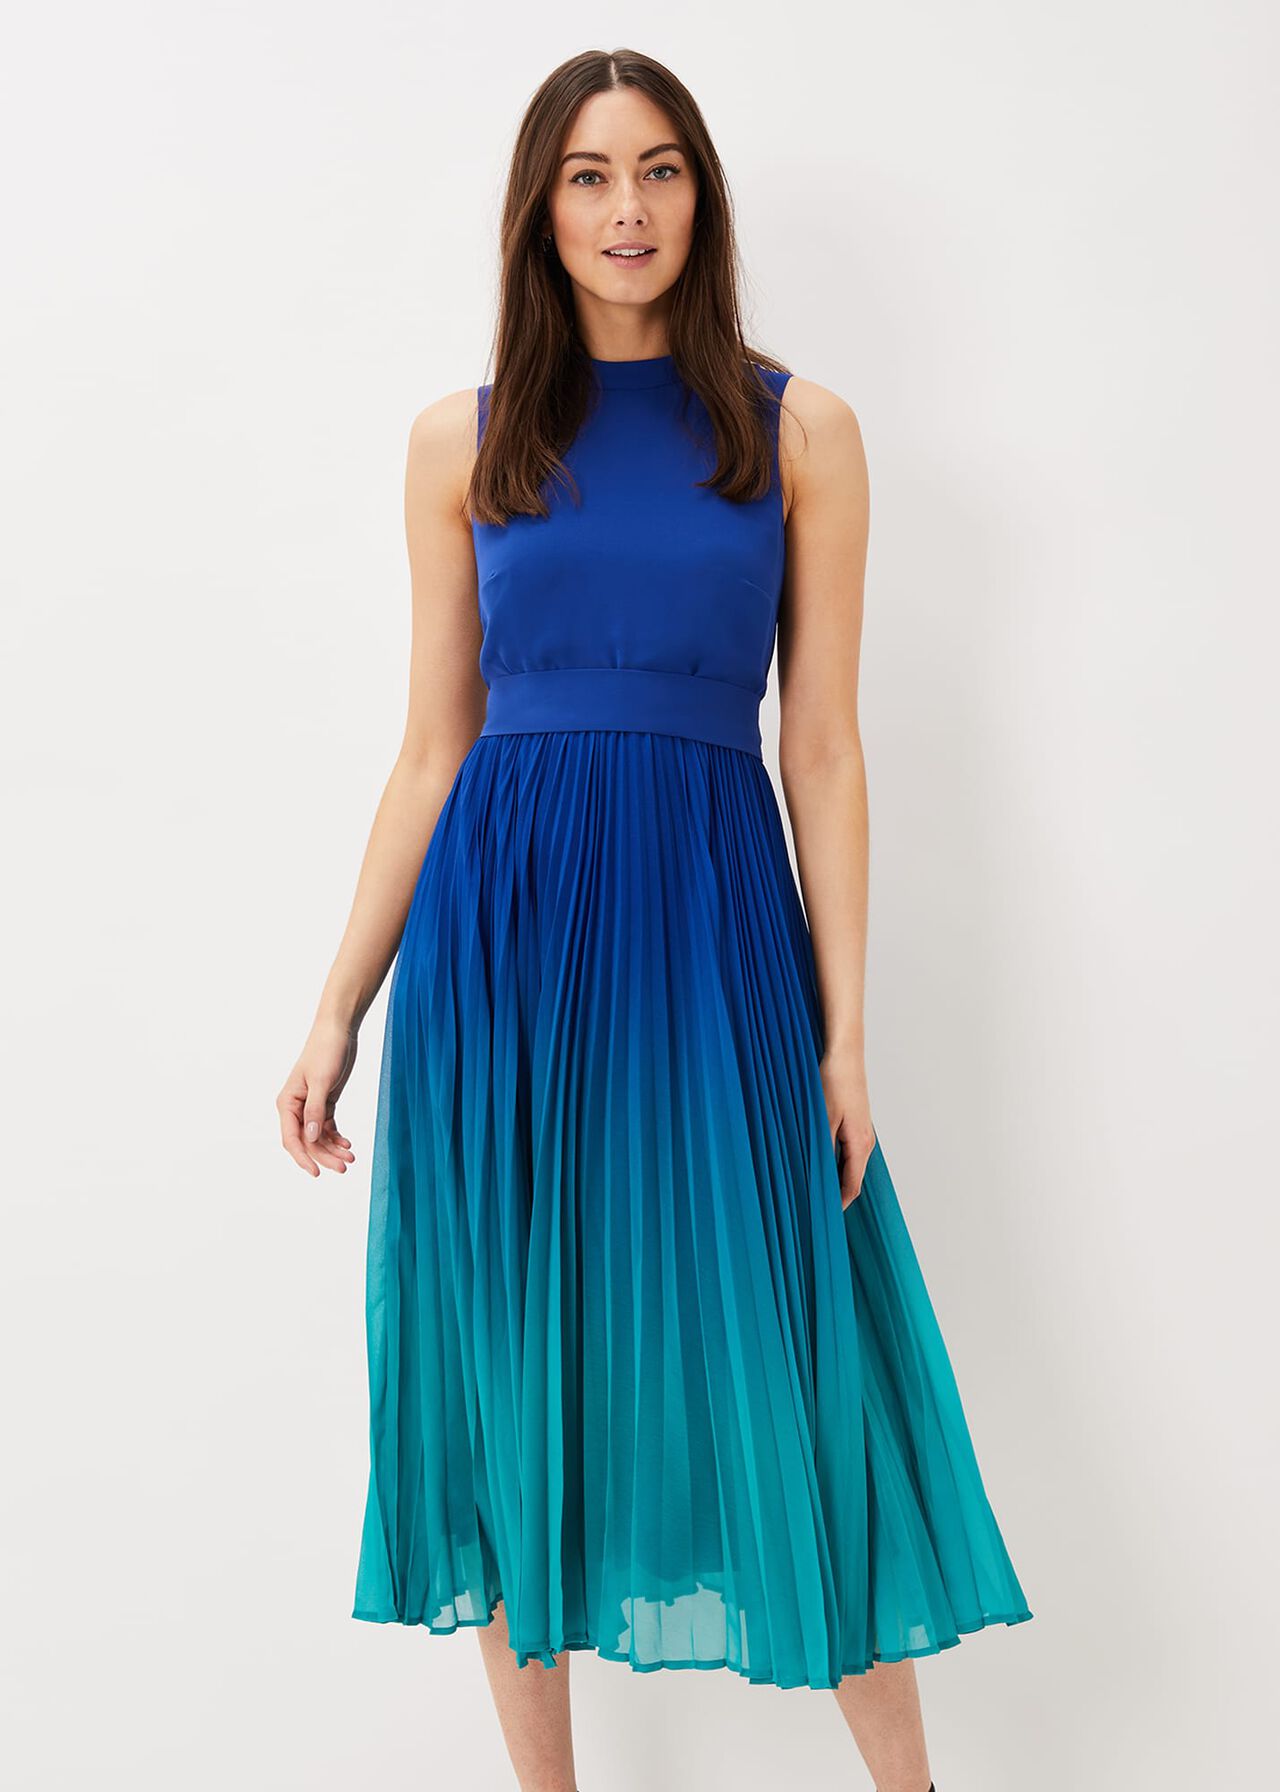 Cobalt Blue Ombre Midi Dress with Pleated Skirt | Phase Eight | Phase ...